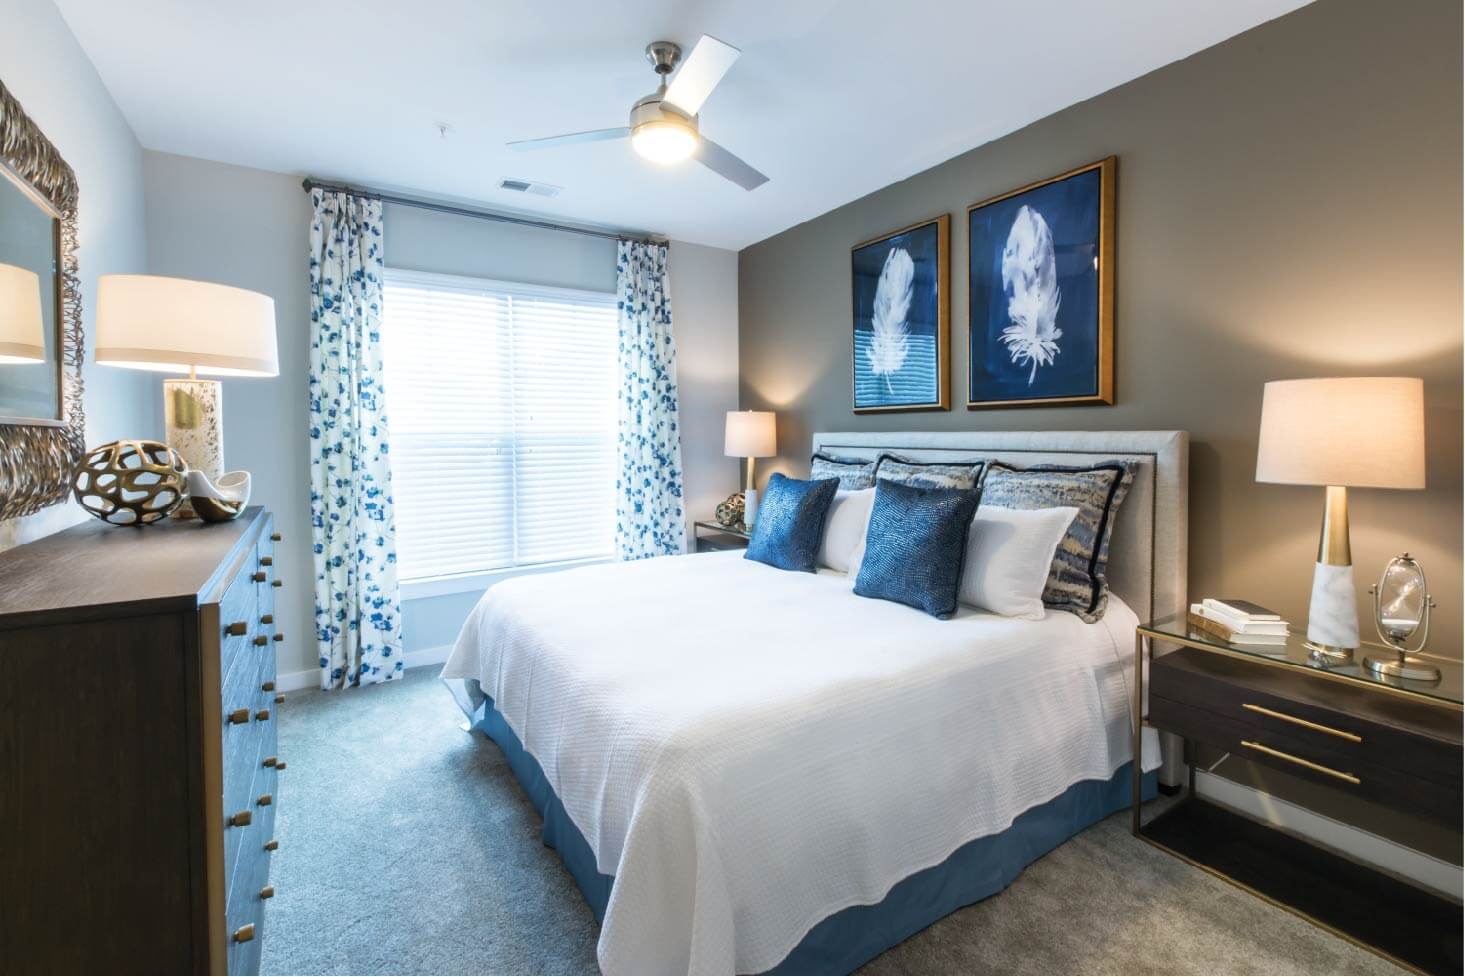 Three Bedroom Apartments in Cary, NC - The Aster - Fully Furnished Bedroom With Carpet, A Large Window, Lighted Ceiling Fan, and Stylish Decor